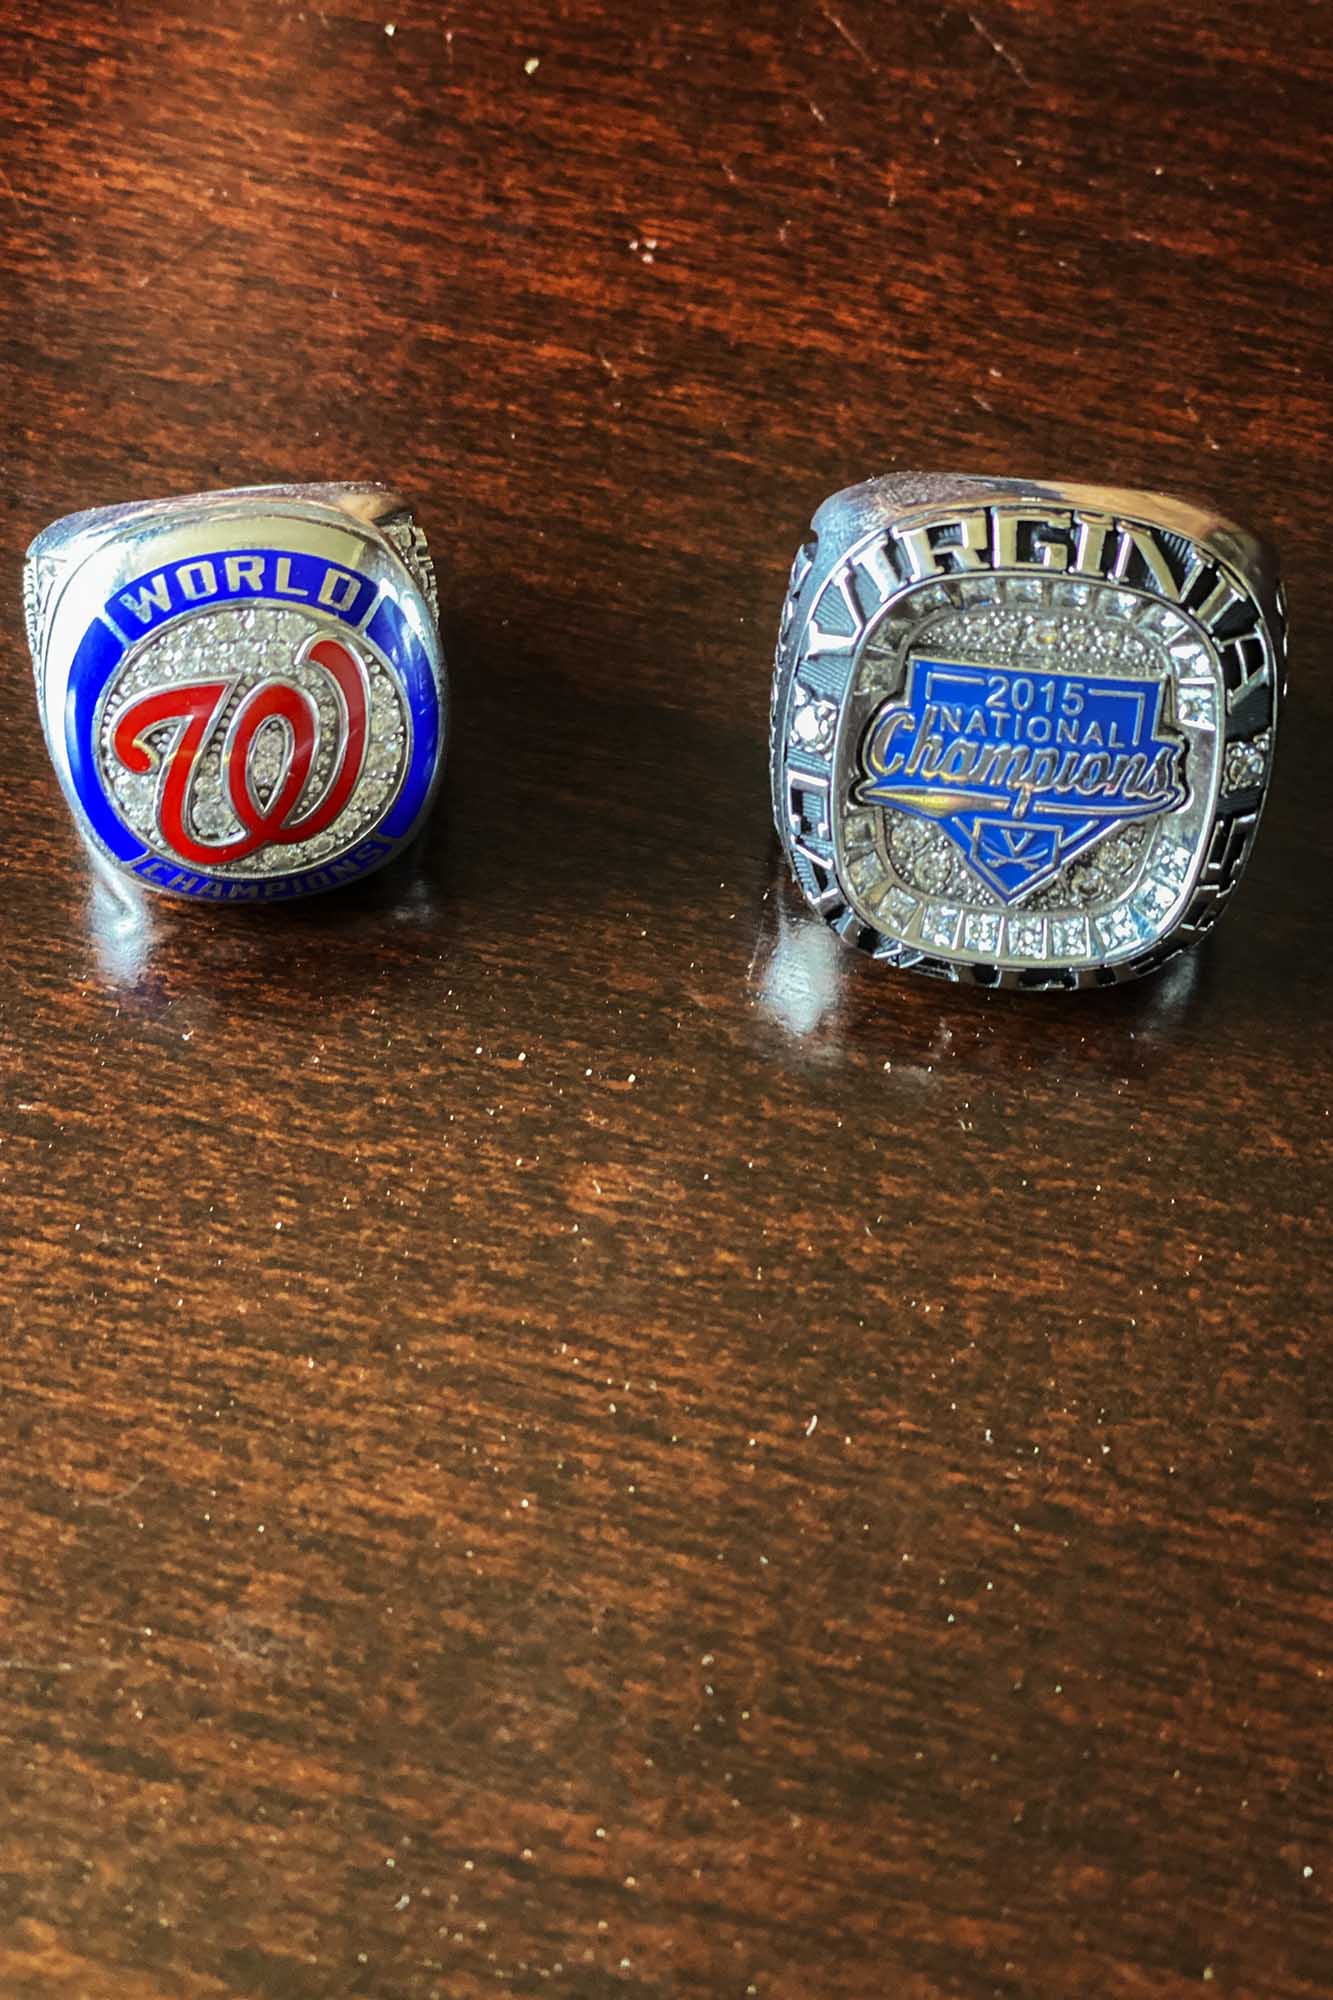 UVA National Championship ring, right, and World Series Championship ring, left